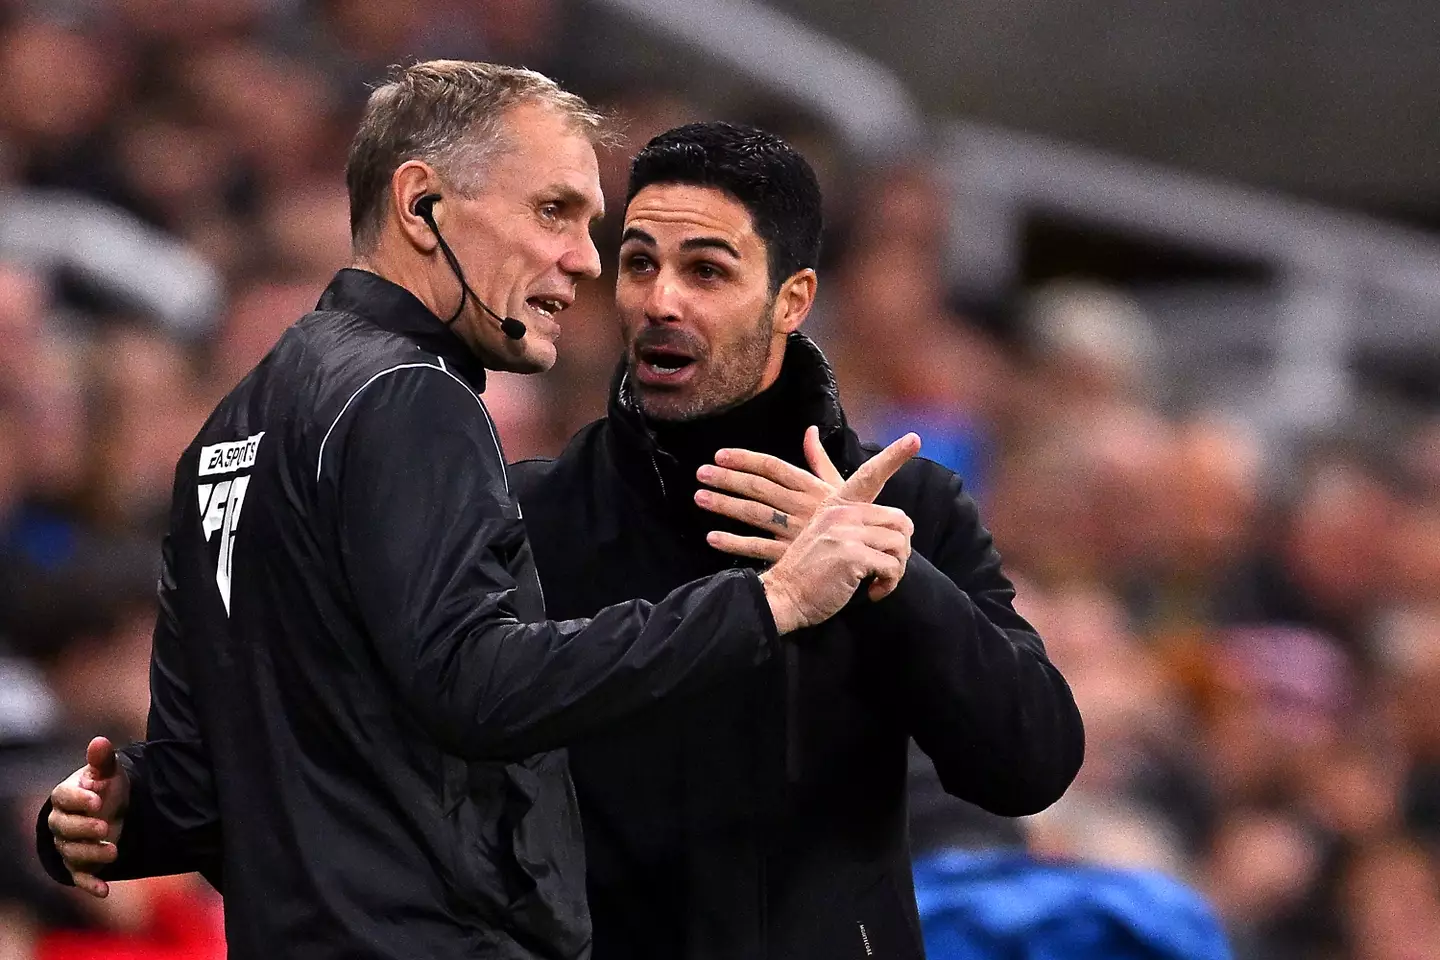 Arteta in discussion with fourth official Graham Scott during the Newcastle game. (Image